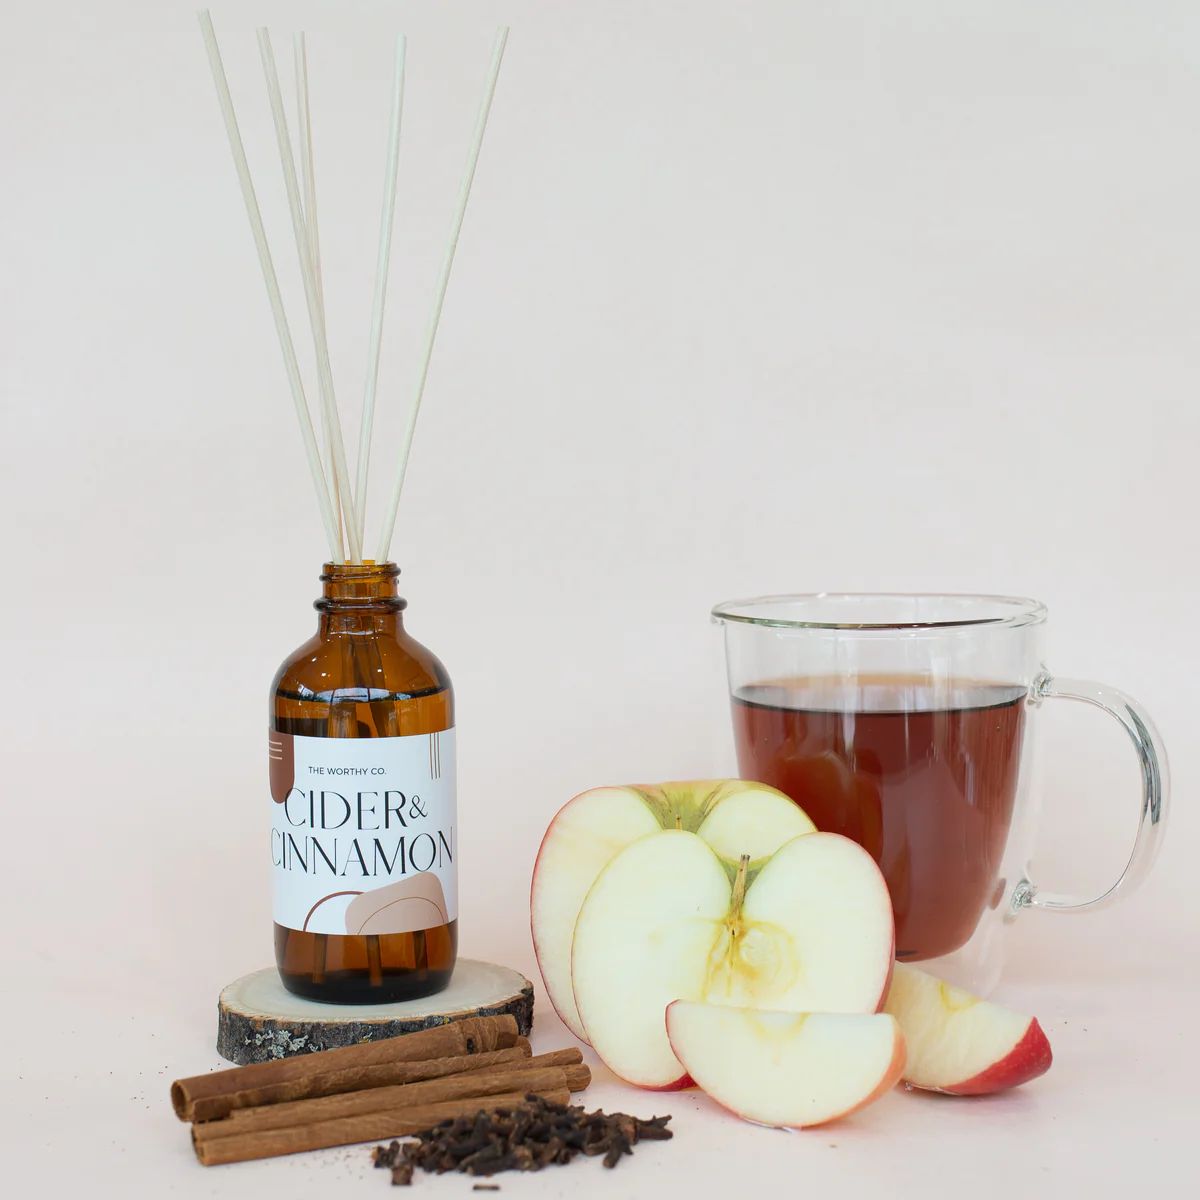 Reed Diffuser: Cider + Cinnamon | The Worthy Co.